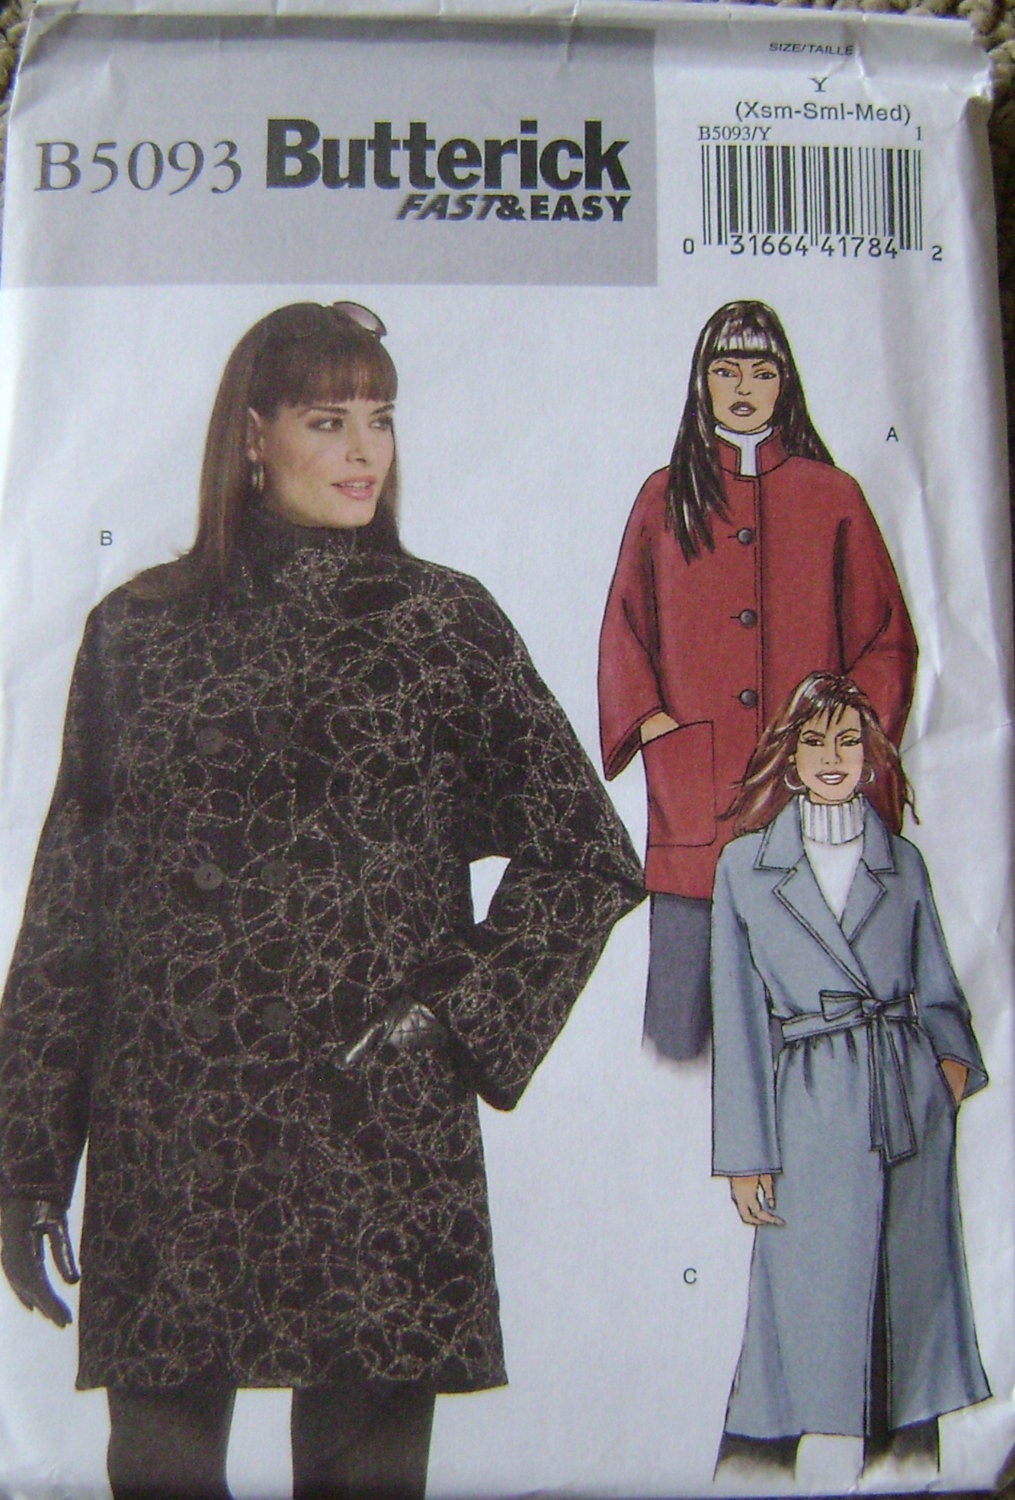 OUT of PRINT Butterick Pattern B5093 Misses' Coat and Belt | Etsy